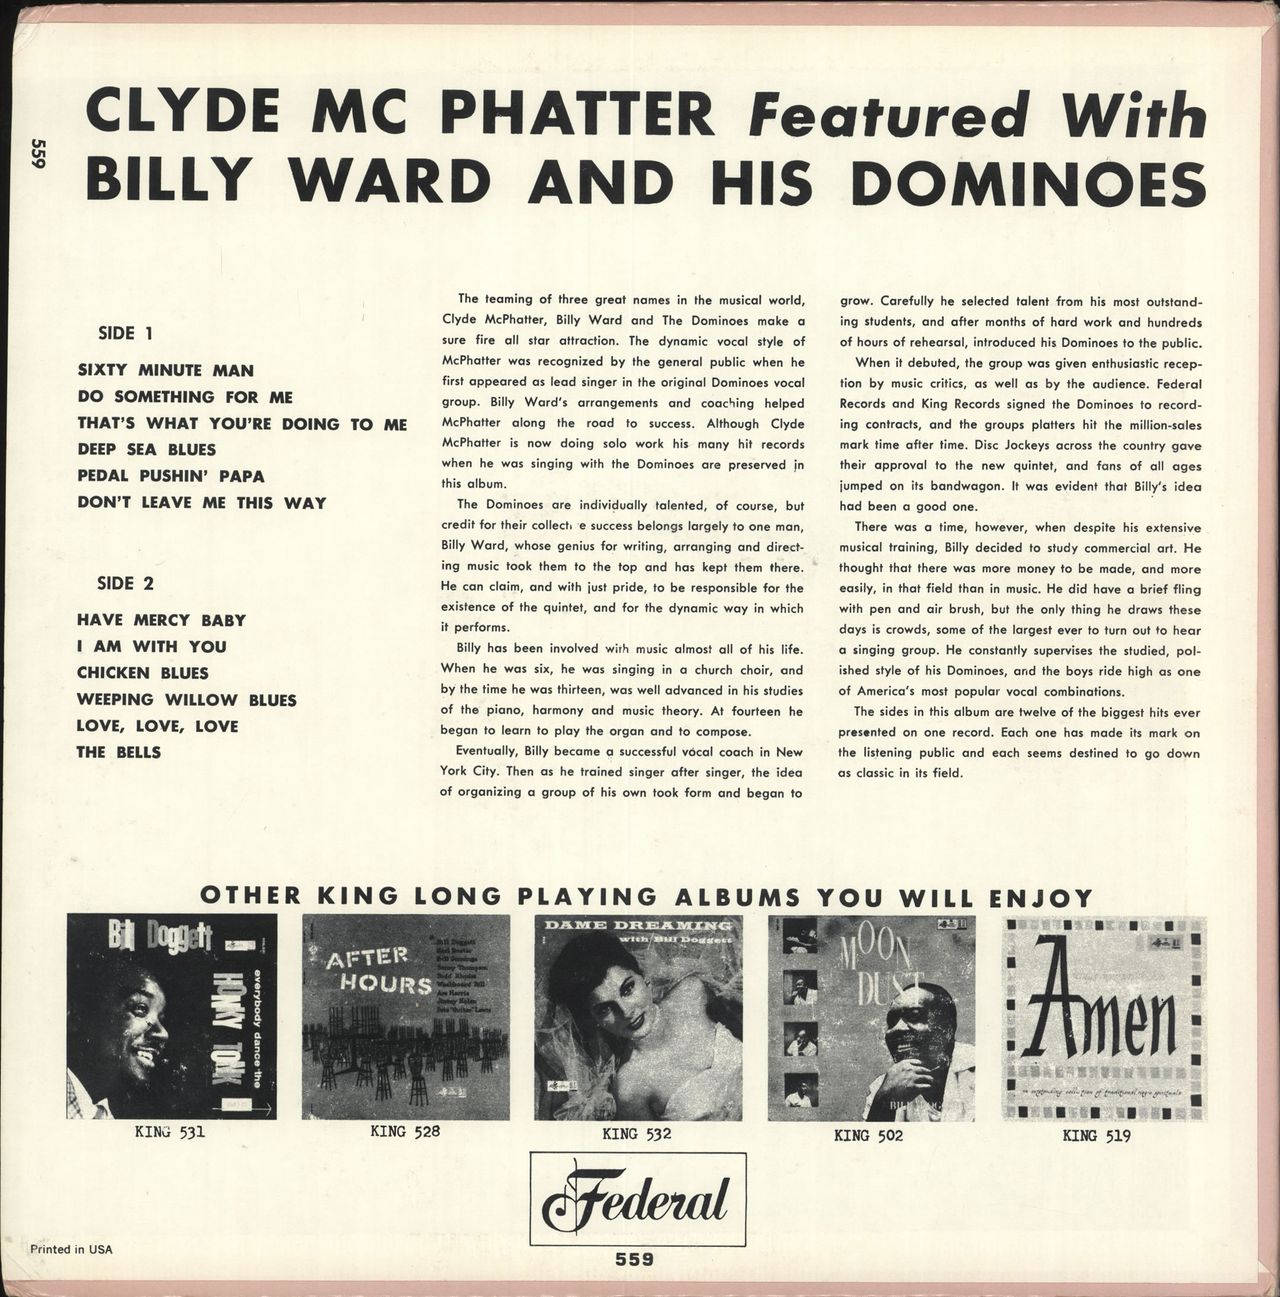 Vintage LP Album Cover of Billy Ward And The Dominoes Wallpaper